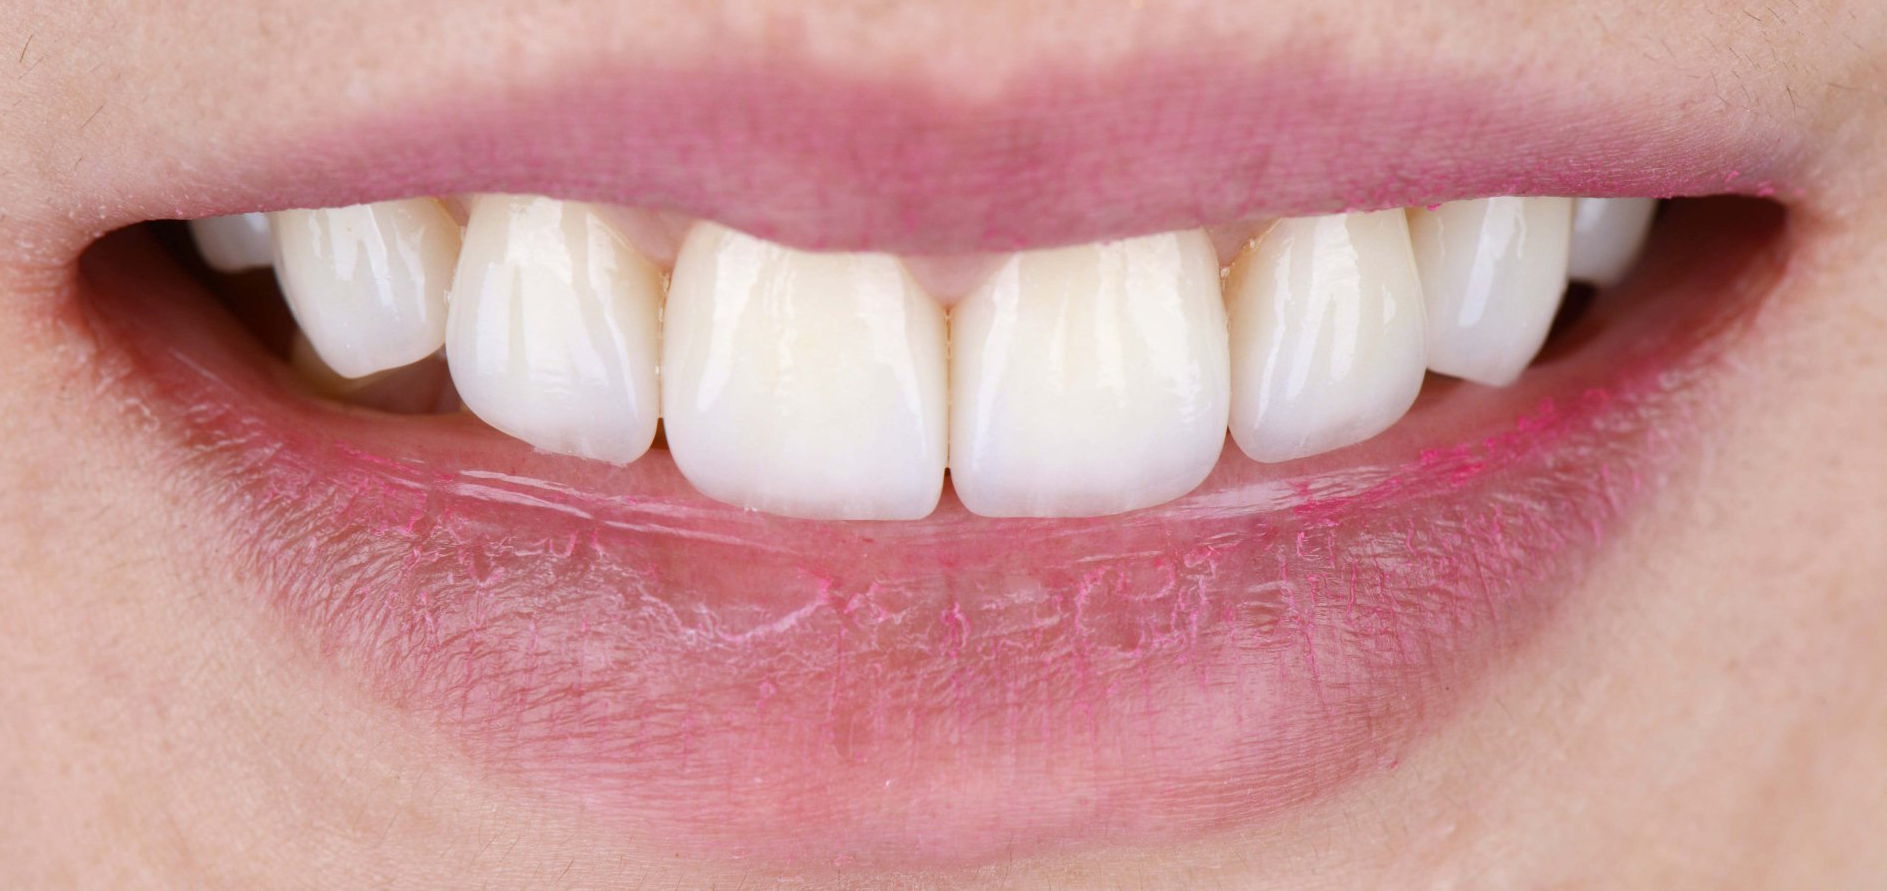 A close up of a person 's mouth with white teeth and pink lips.